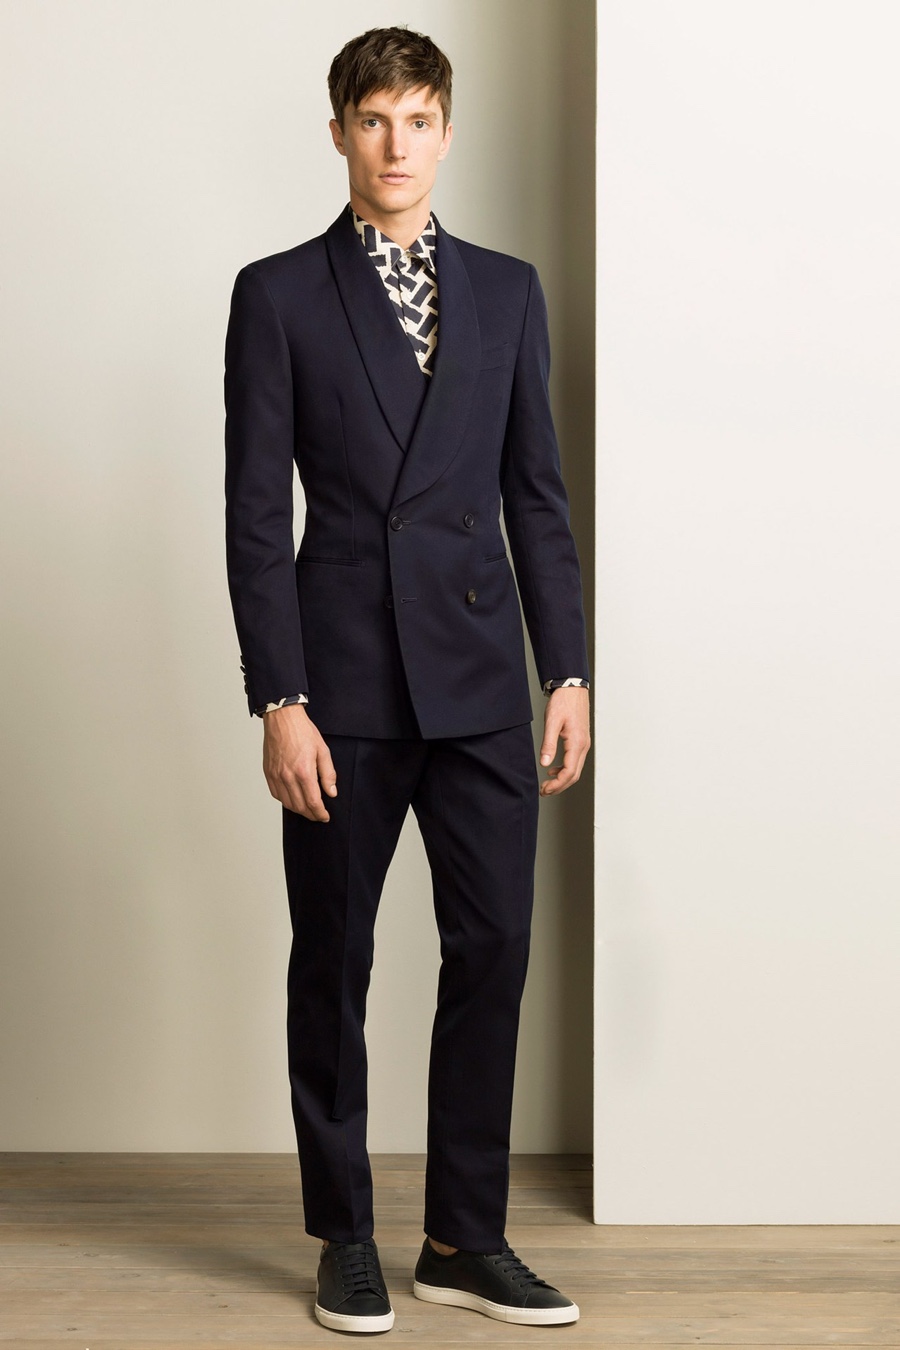 Gieves & Hawkes Spring/Summer 2016 | London Collections: Men – The ...